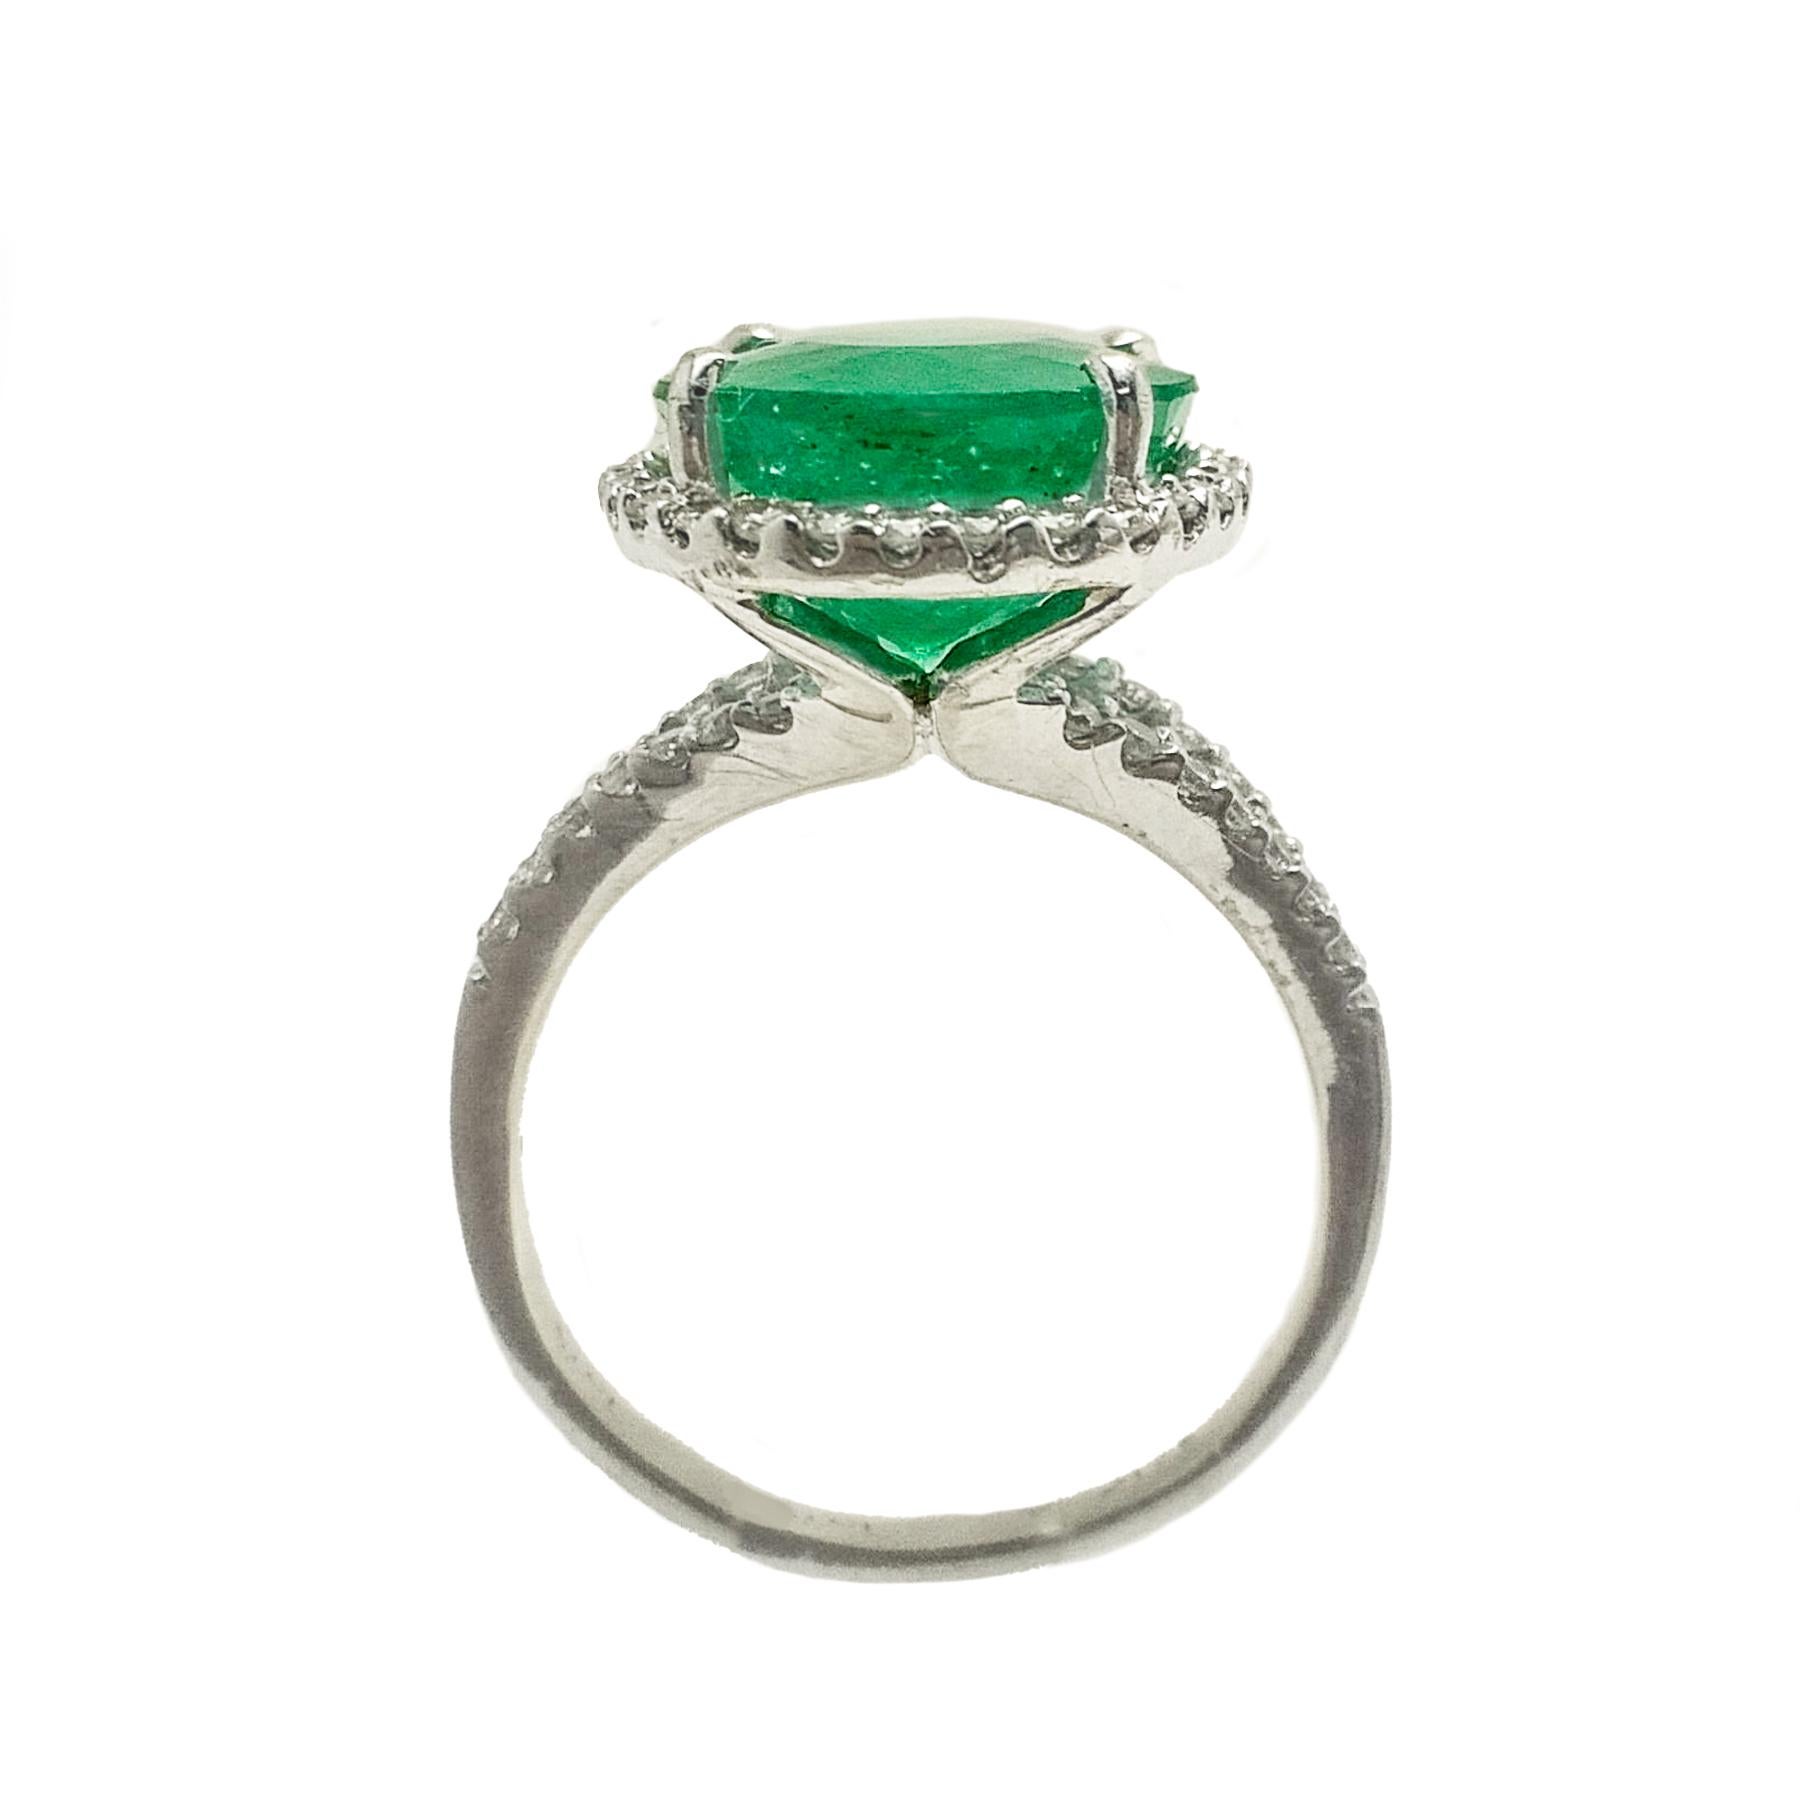 Glamorous emerald diamond ring. Handcrafted green, oval faceted natural emerald encased in open mounting with four round head prongs, accented with round brilliant cut diamond. Beautiful high polished cocktail ring set in 14 karat white gold.